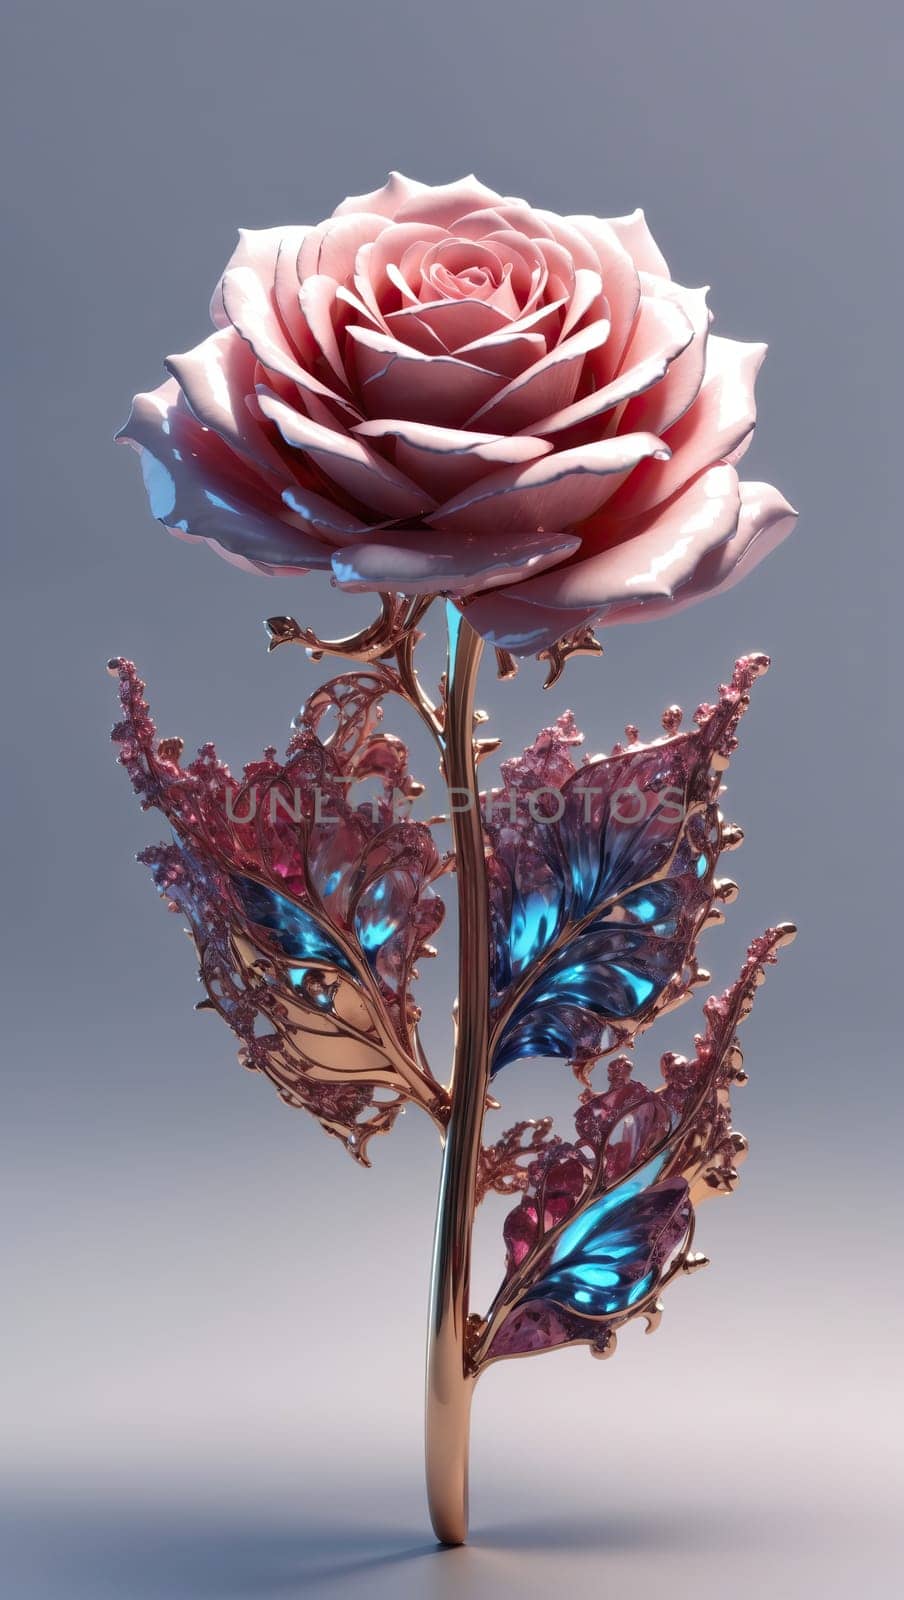 Porcelain rose with golden stem and leaves. AI generated